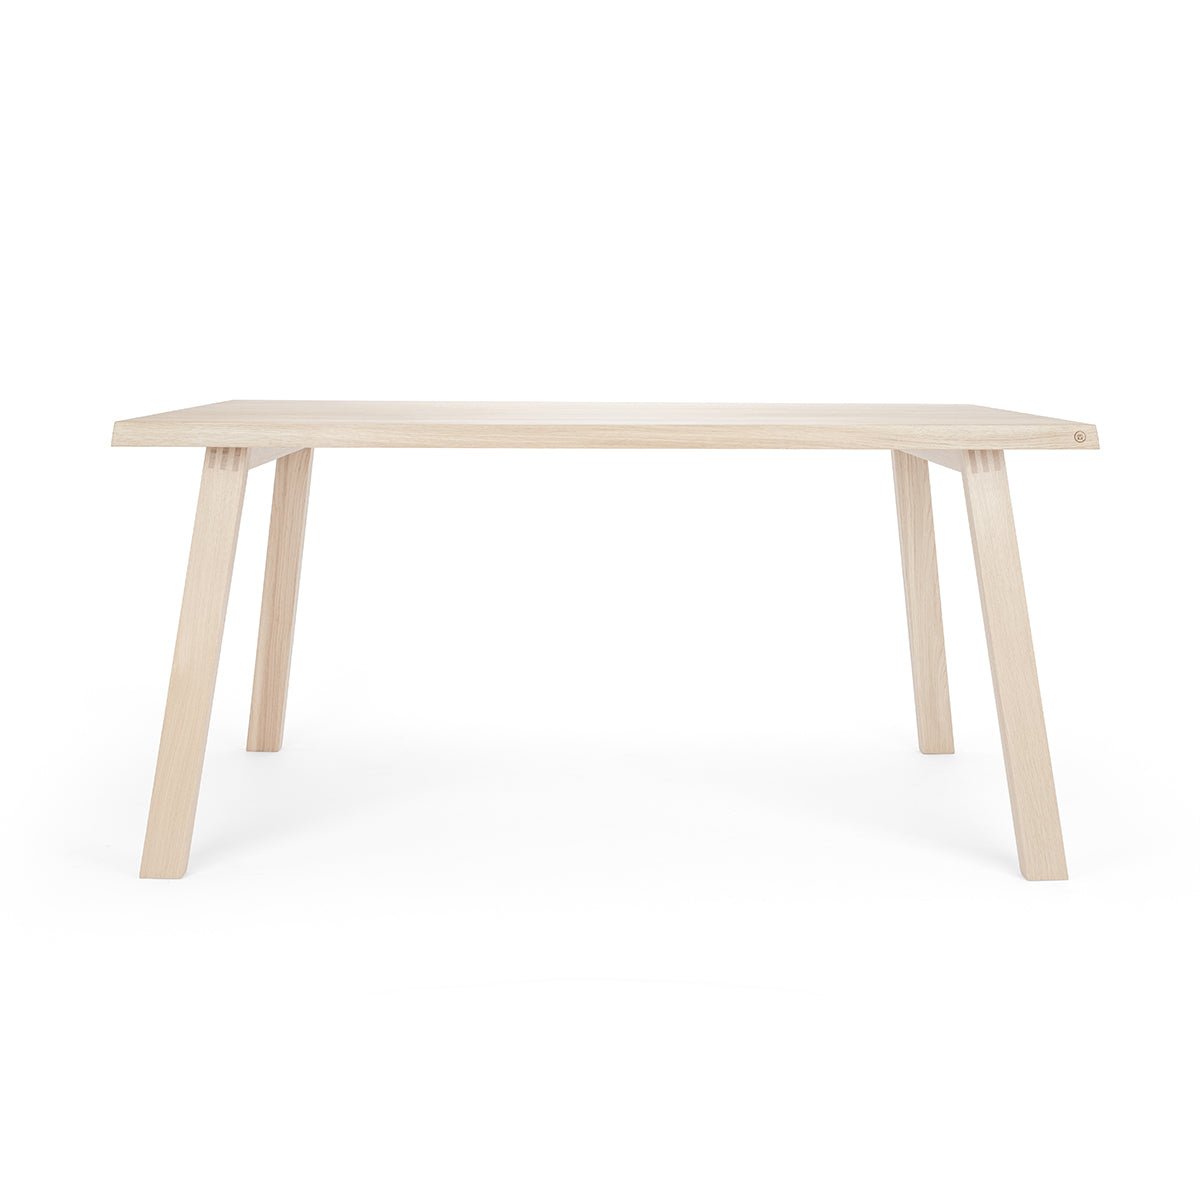 Elegant table »Fritz« made of oak wood with a natural look